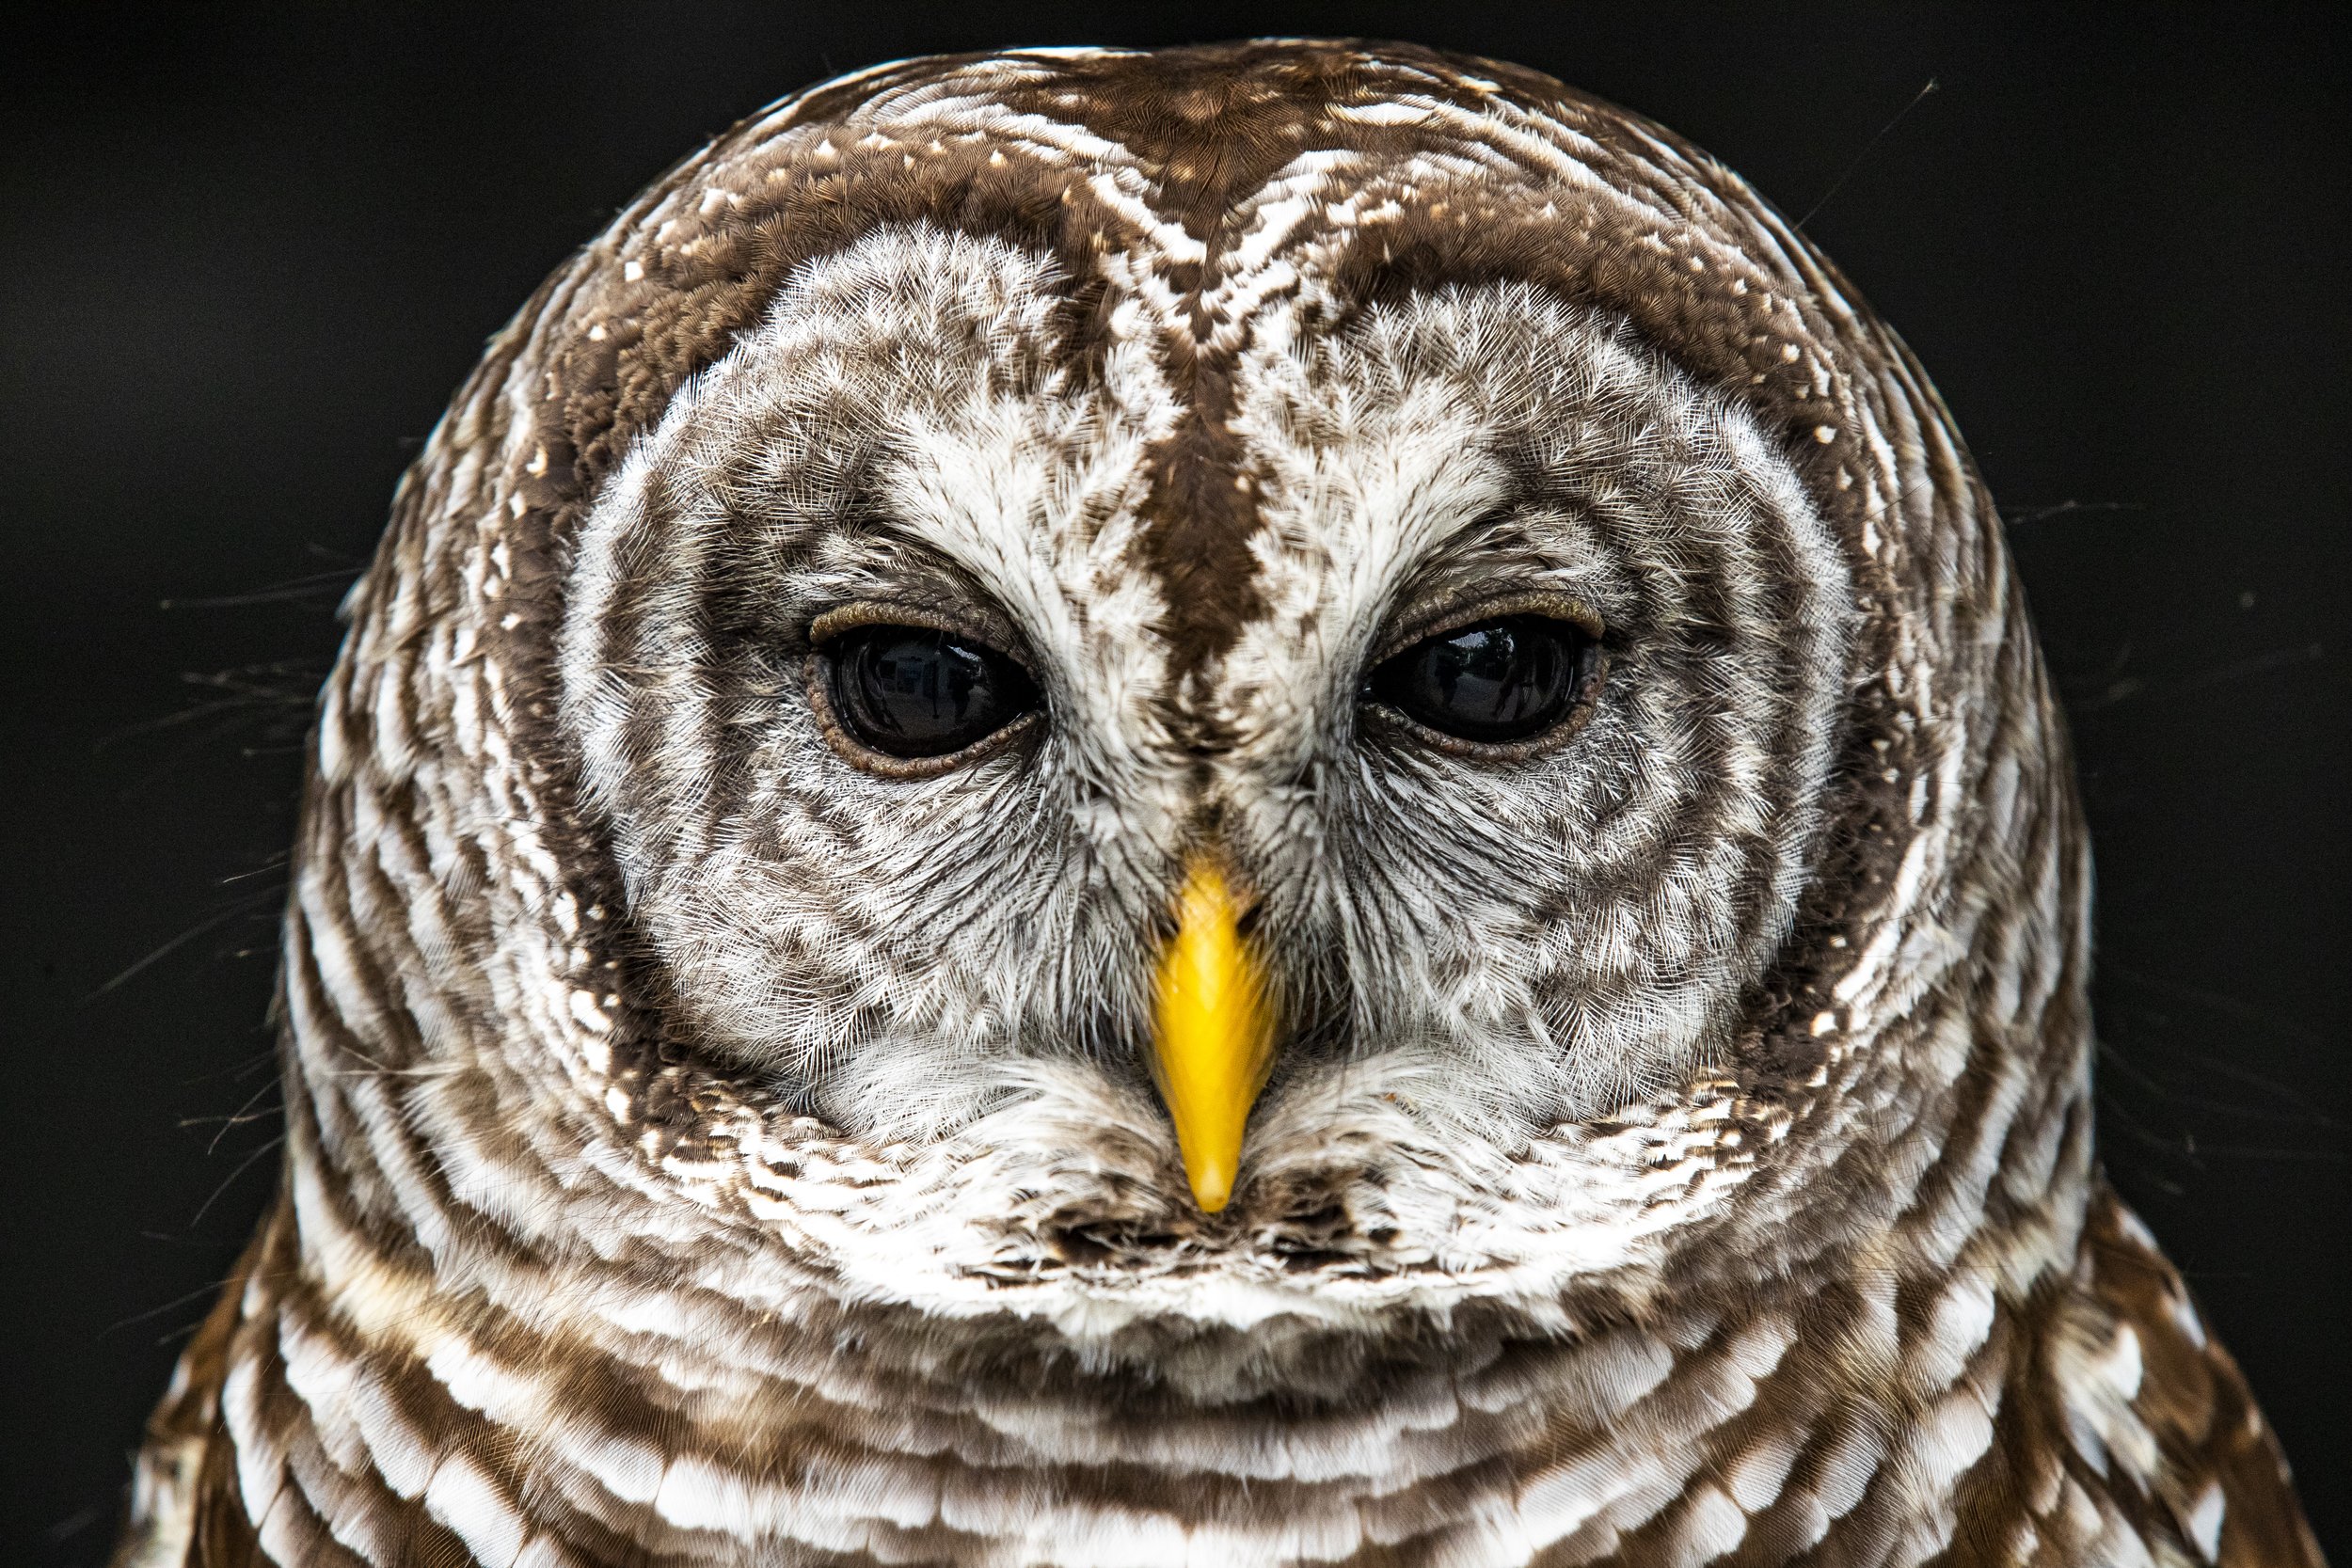  Maple, a barred owl, is one of the ambassador birds at the Audubon Center for Birds of Prey in Maitland on Wednesday, Jan. 13, 2021.  